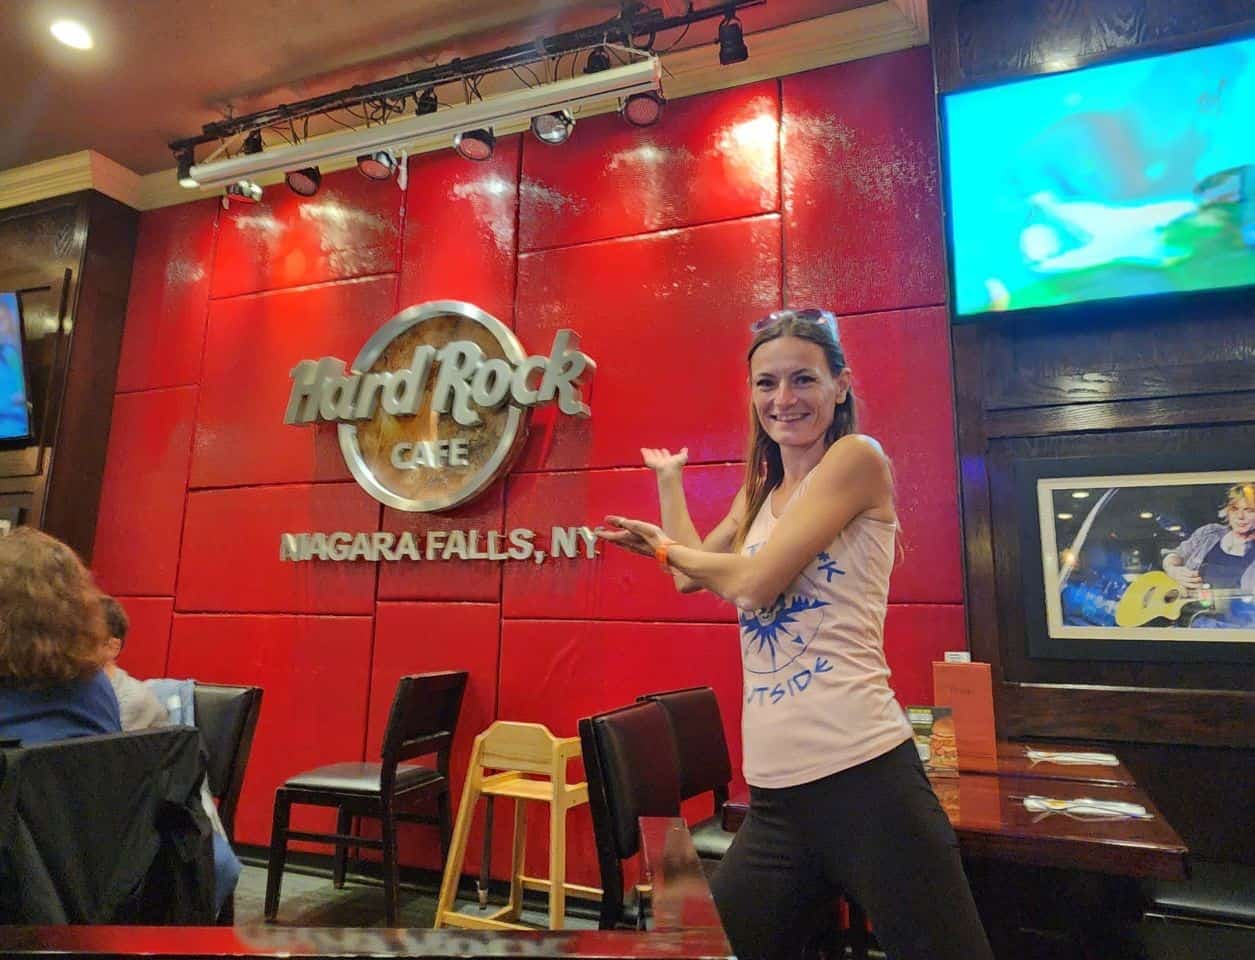 Hard Rock Cafe Niagara Falls New York is a classic food stop for these Canadians.